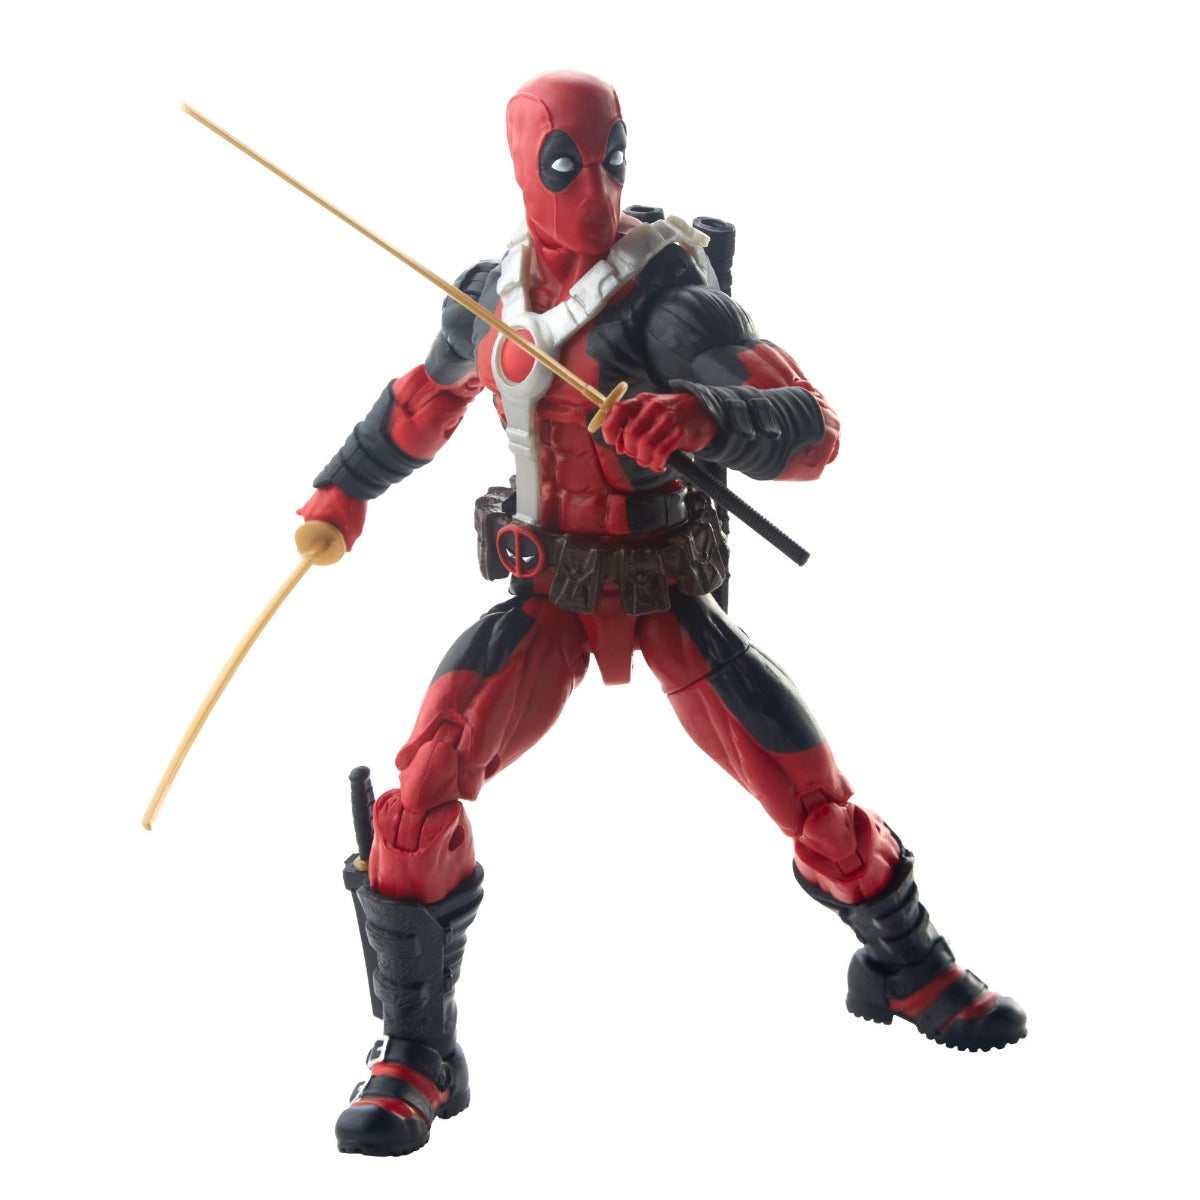 Marvel Legends Series Deadpool with Scooter Action Figure